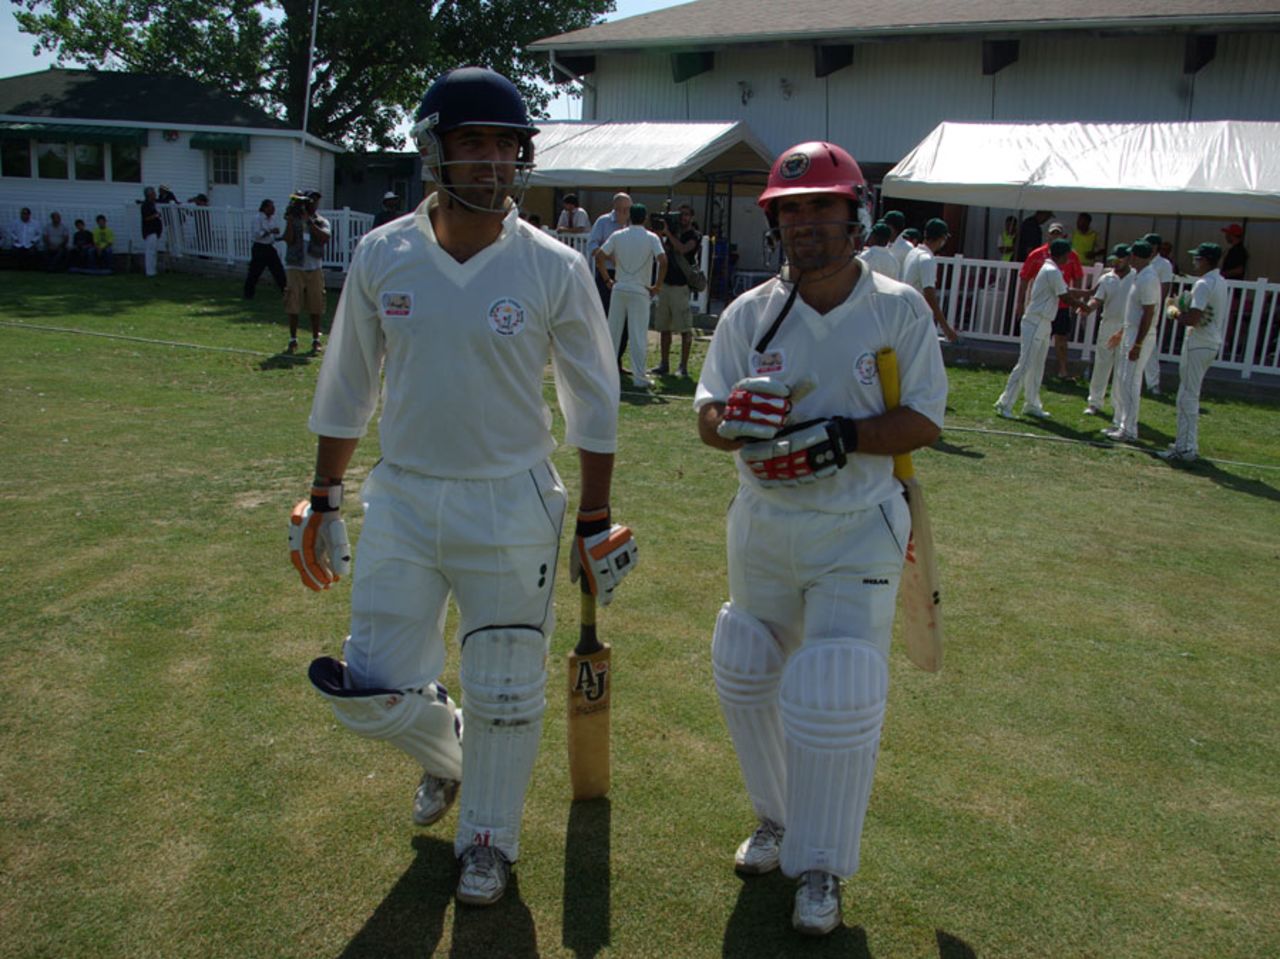 Afghanistan openers Noor Ali Zadran and Karim Sadiq head out to bat in the first innings, Canada v Afghanistan, ICC Intercontinental Cup, day 1, King City, August 2, 2011